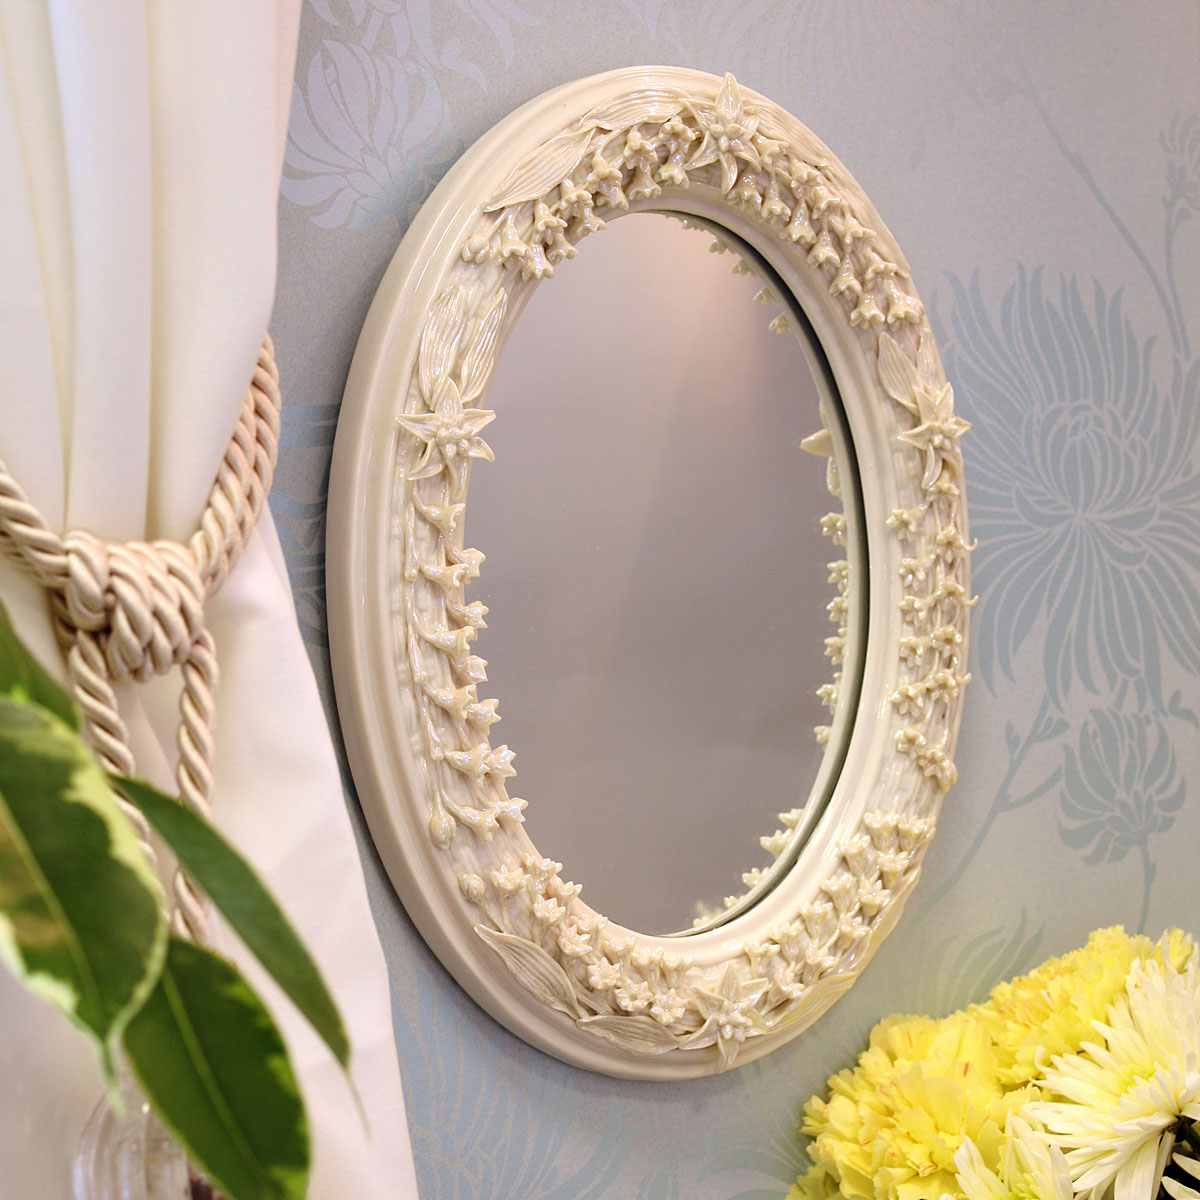 Belleek China Lily of The Valley Mop Mirror, 8 1/2 x 10 1/2"